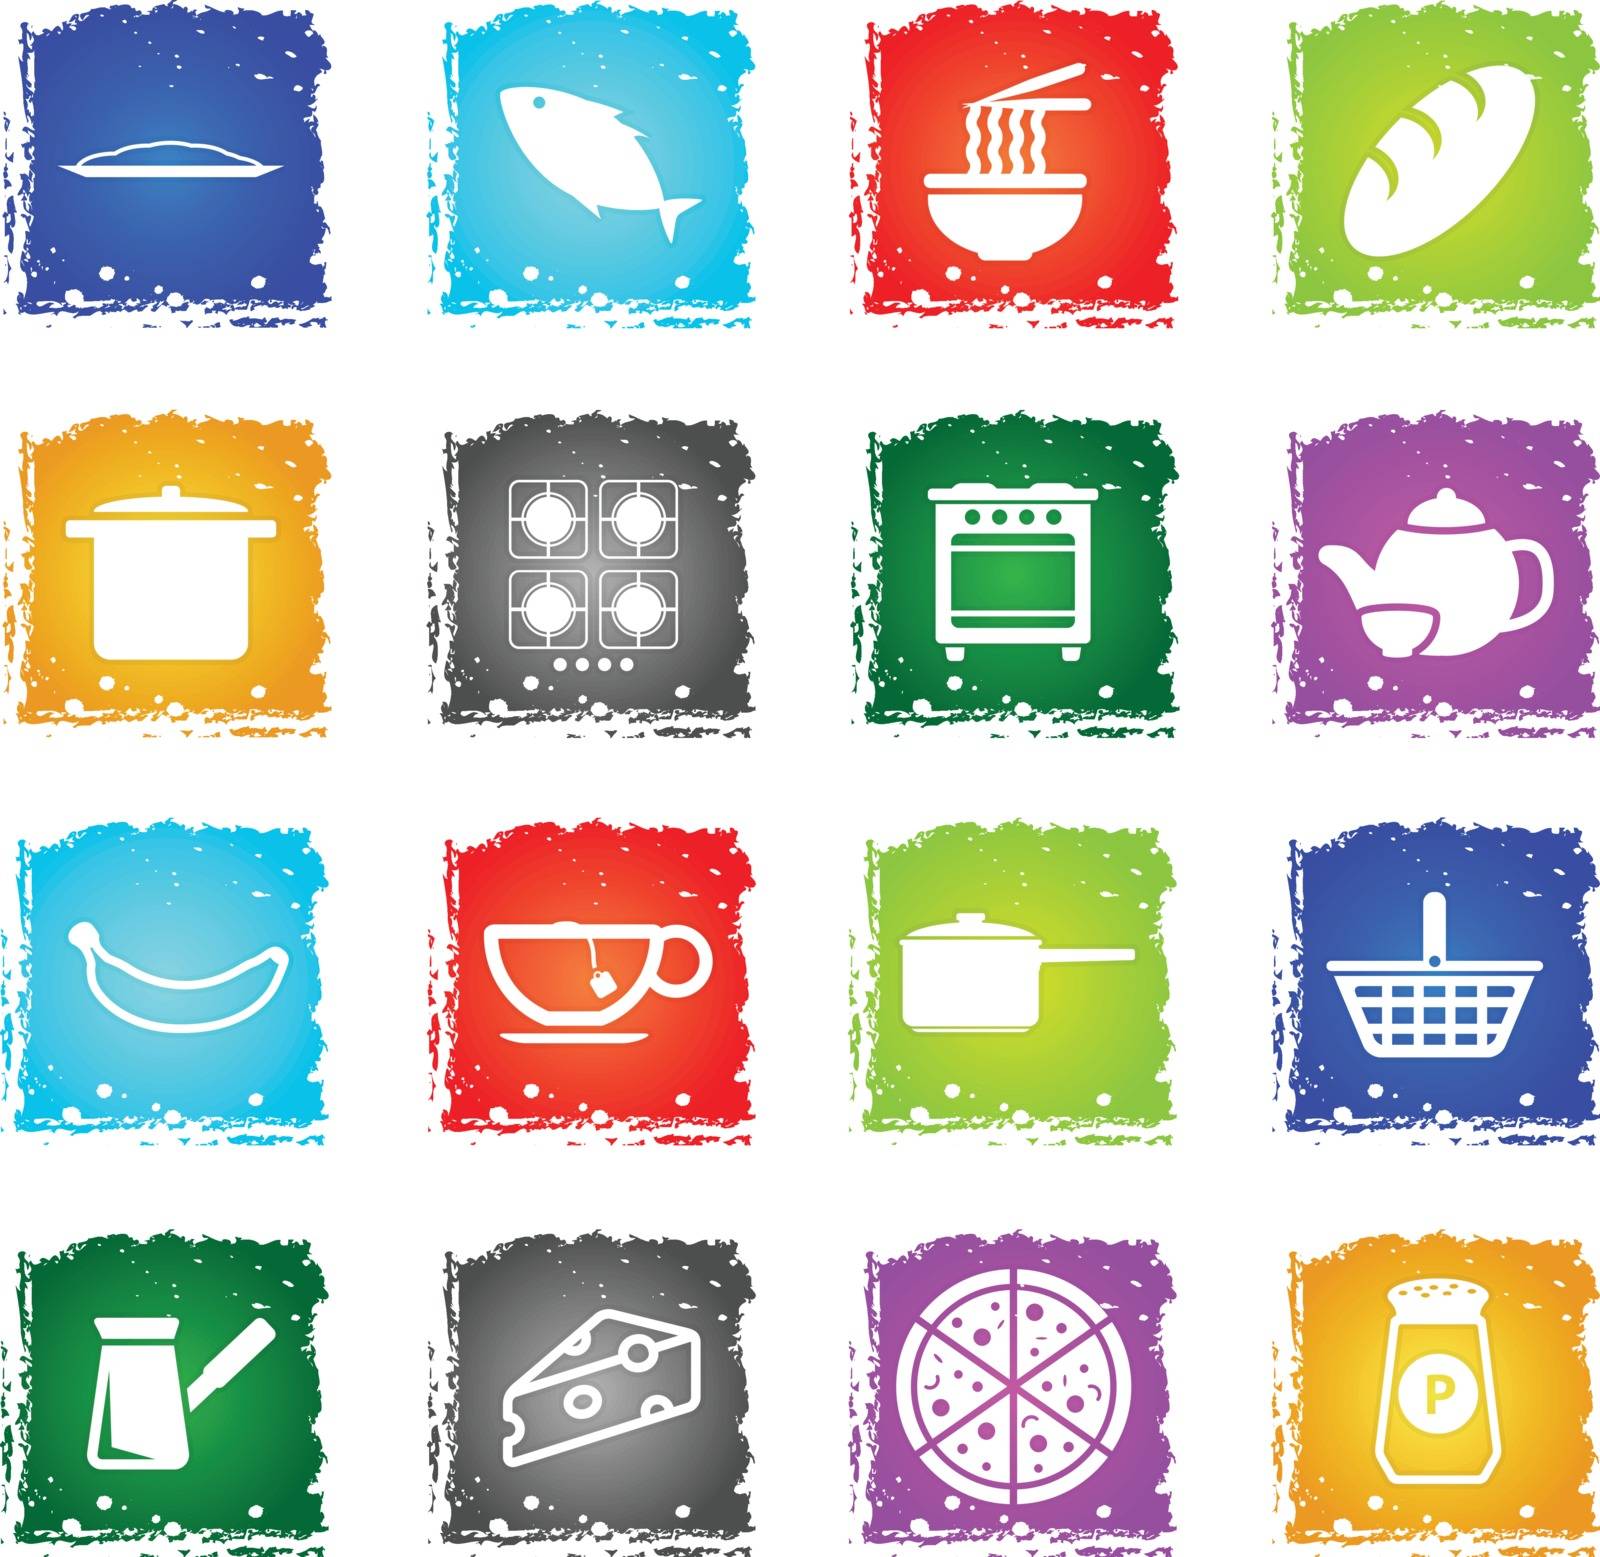 Food and kitchen simple icons in grunge style for user interface design